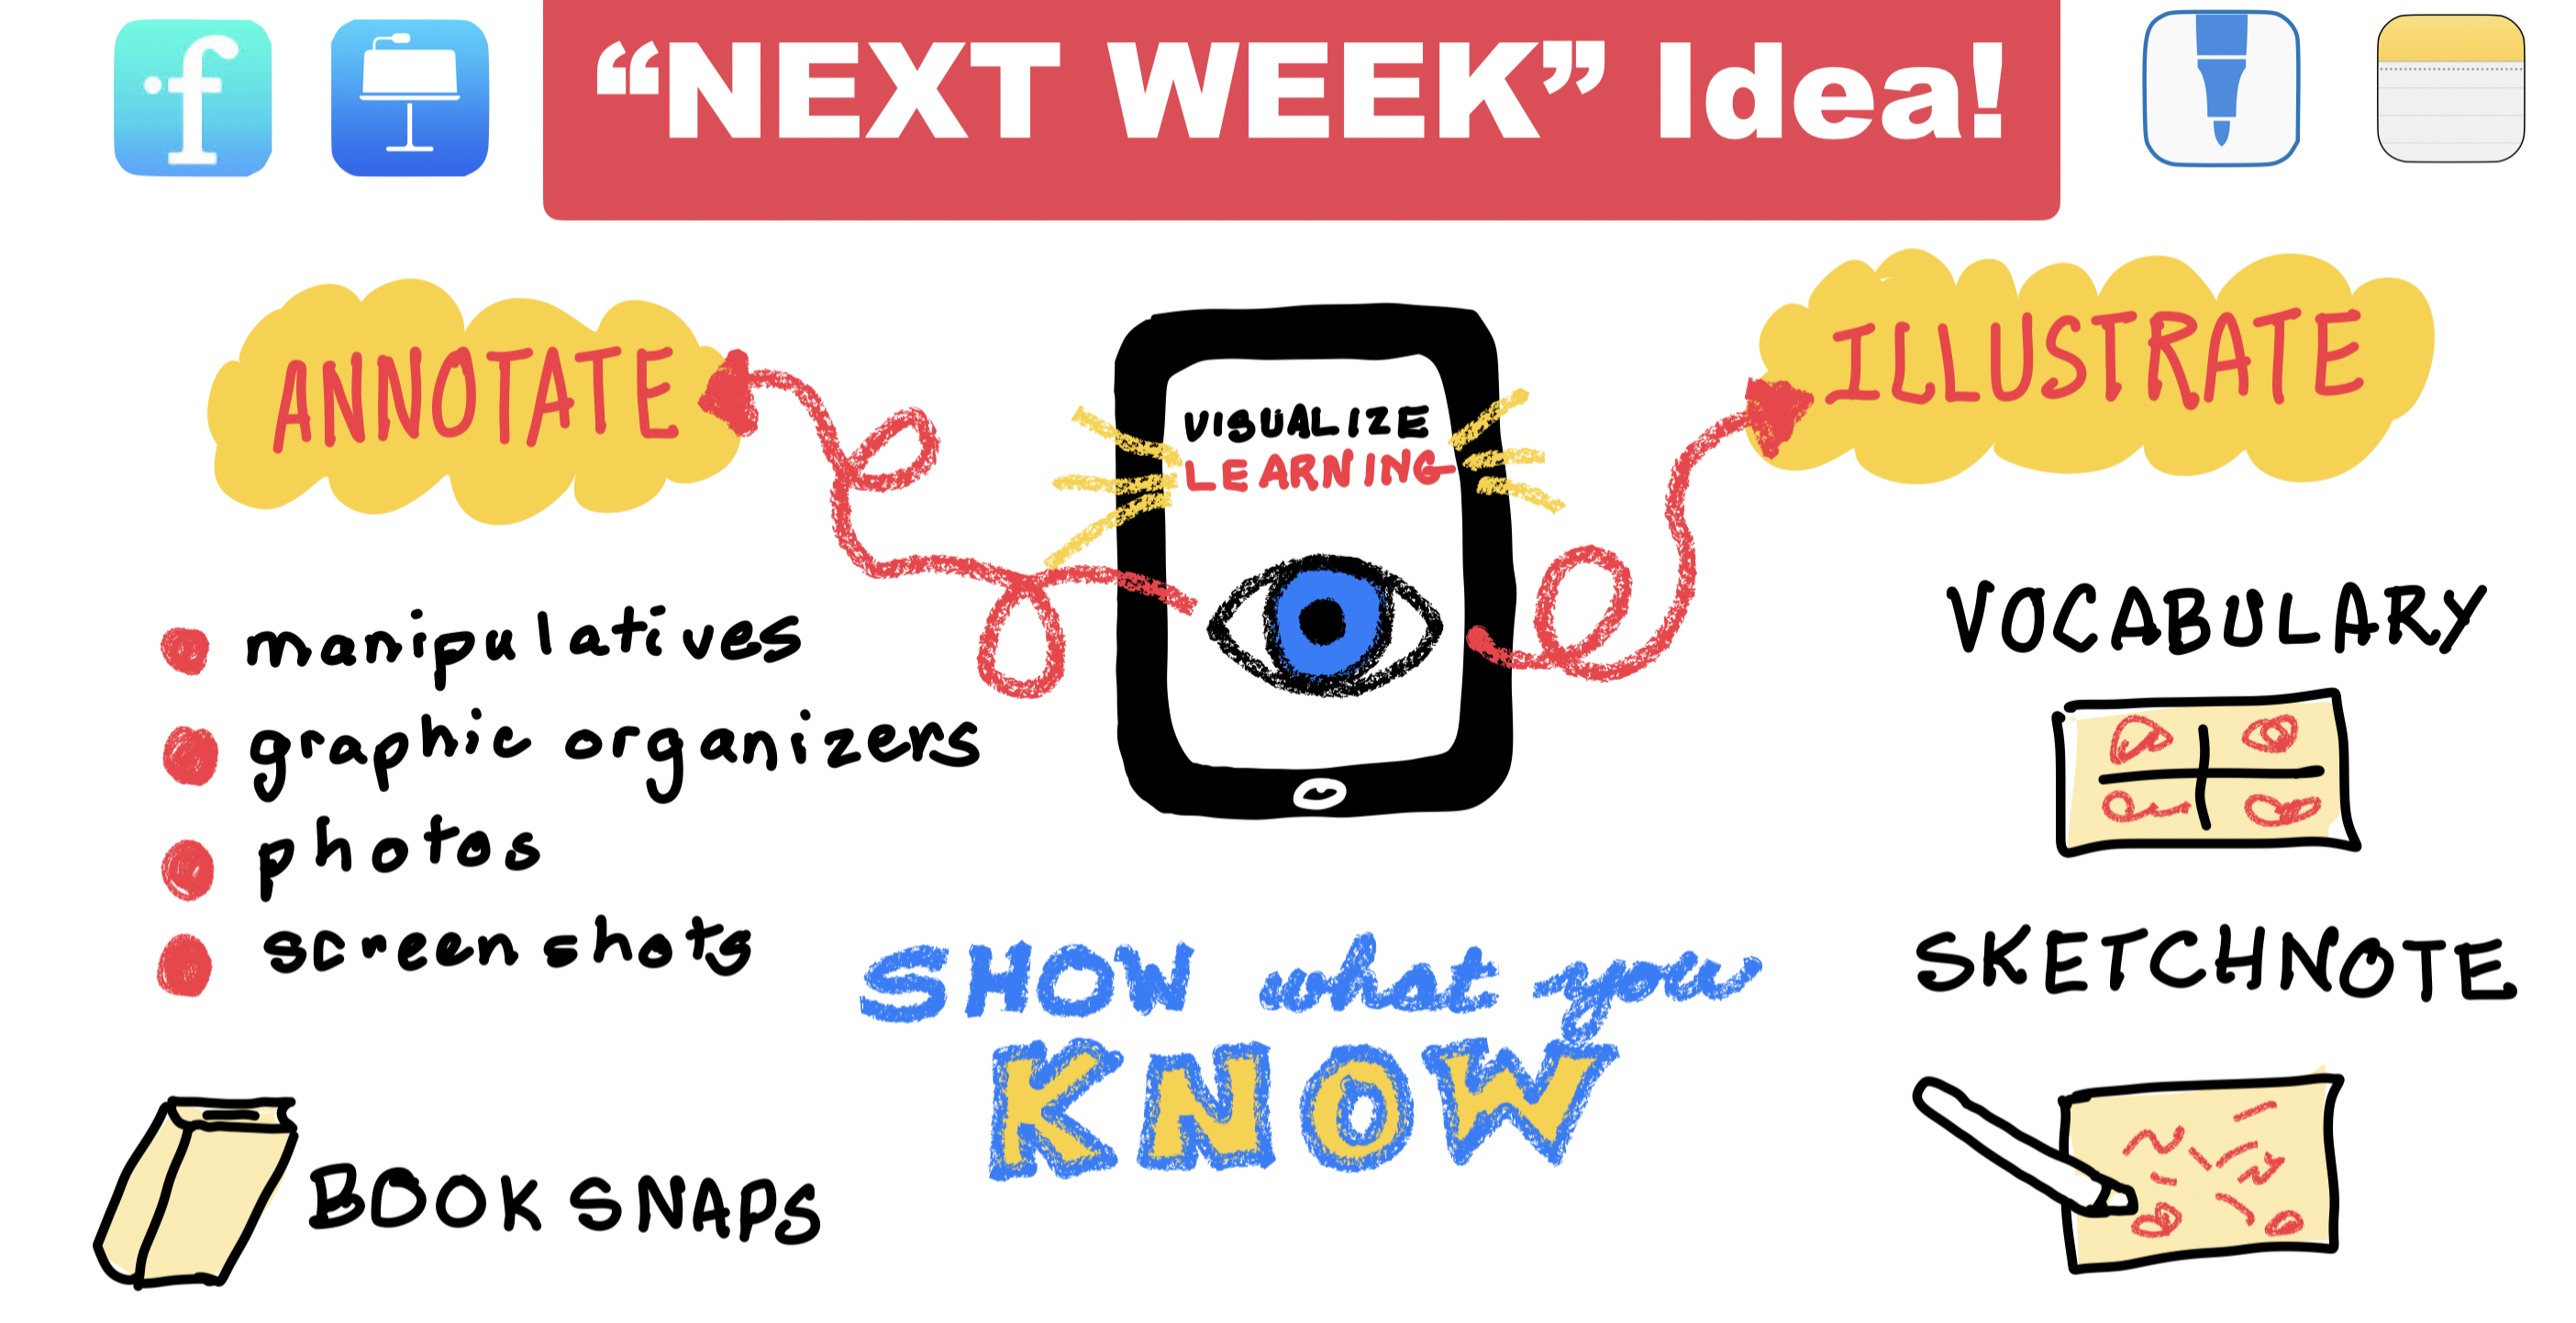 Show What You Know sketchnote